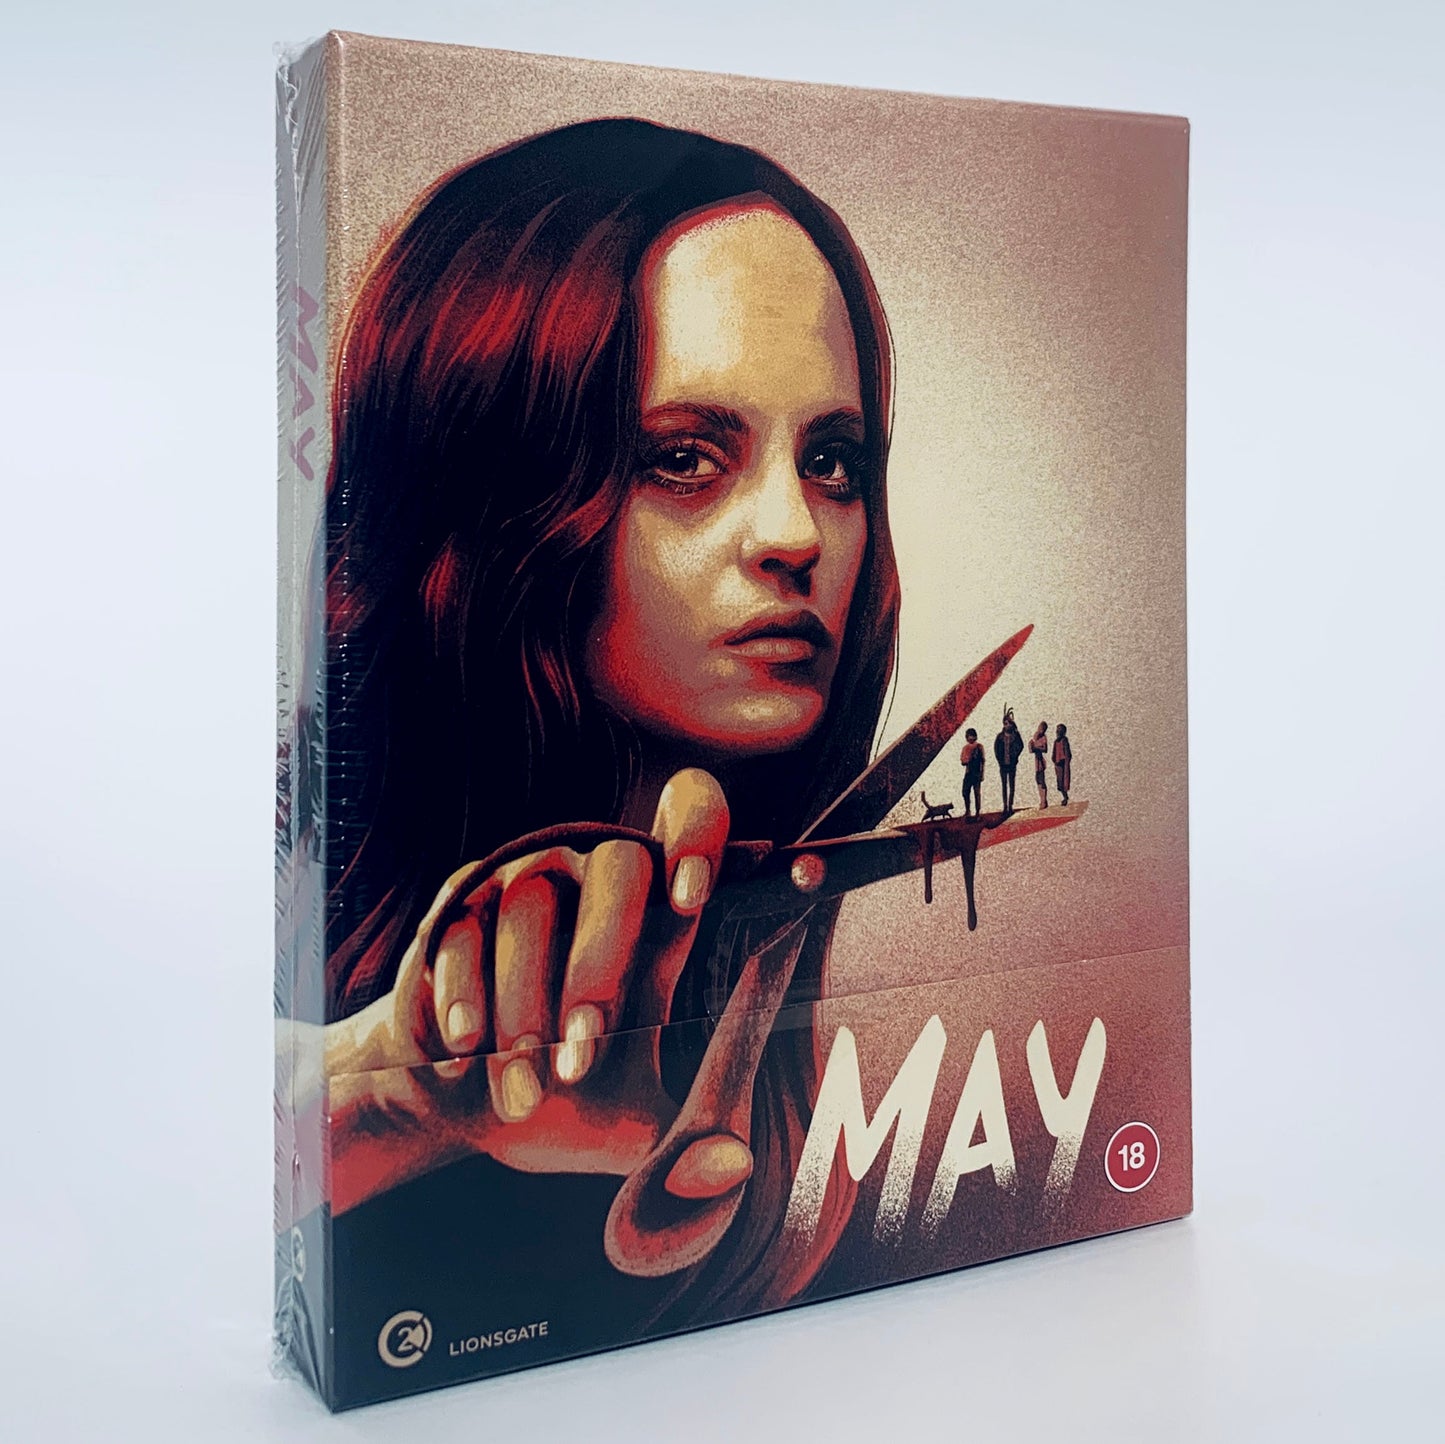 May Limited Edition Lucky McKee Angela Bettis Blu-ray Region B Second Sight